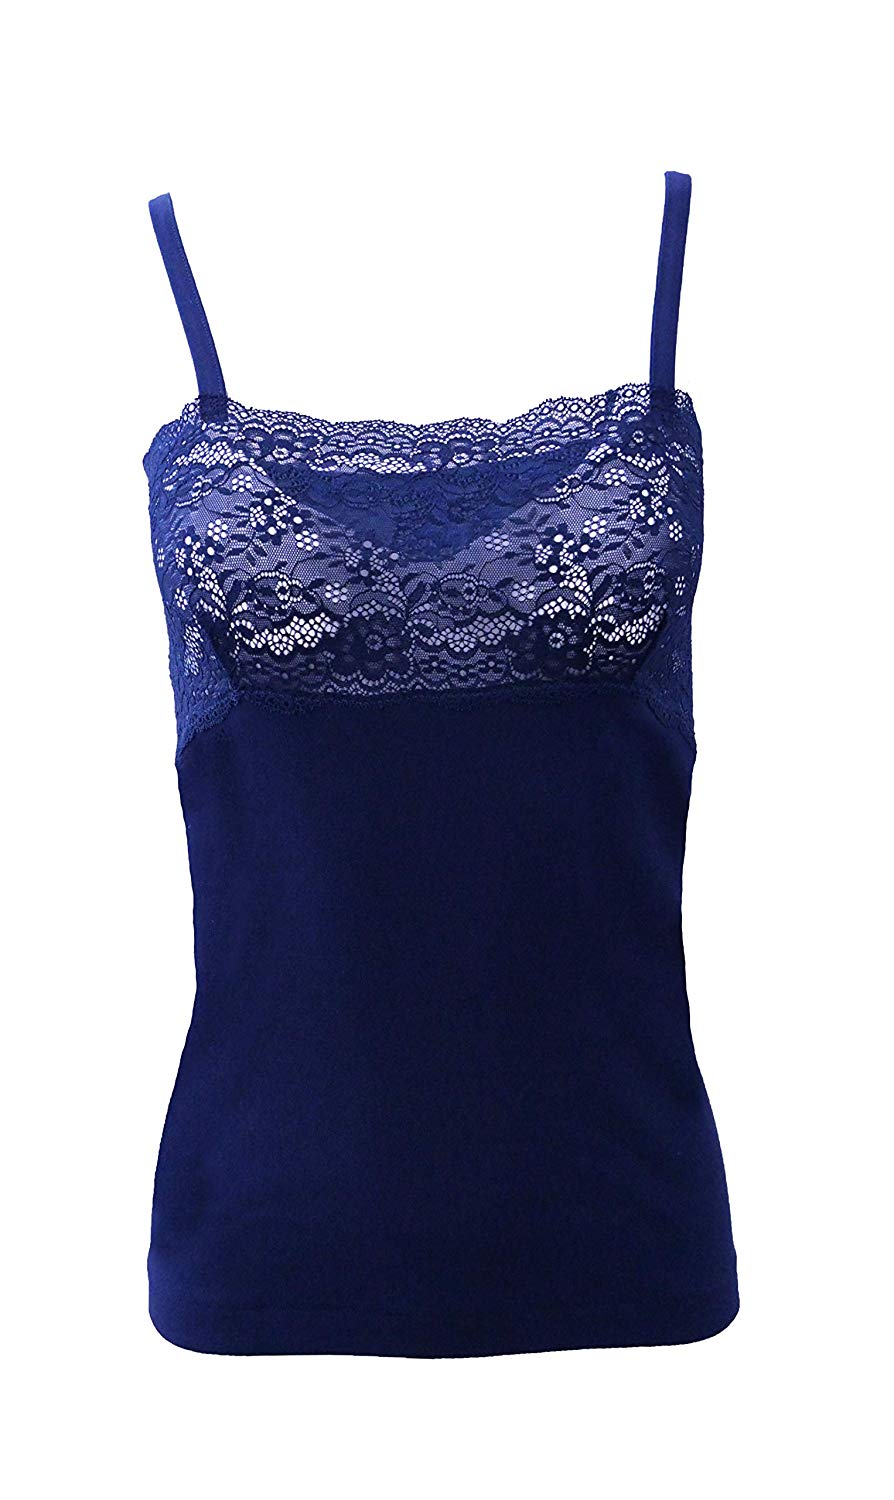 Mare Luxury 100% Mako Cotton Women's Lace-Trimmed Camisole. Proudly Ma